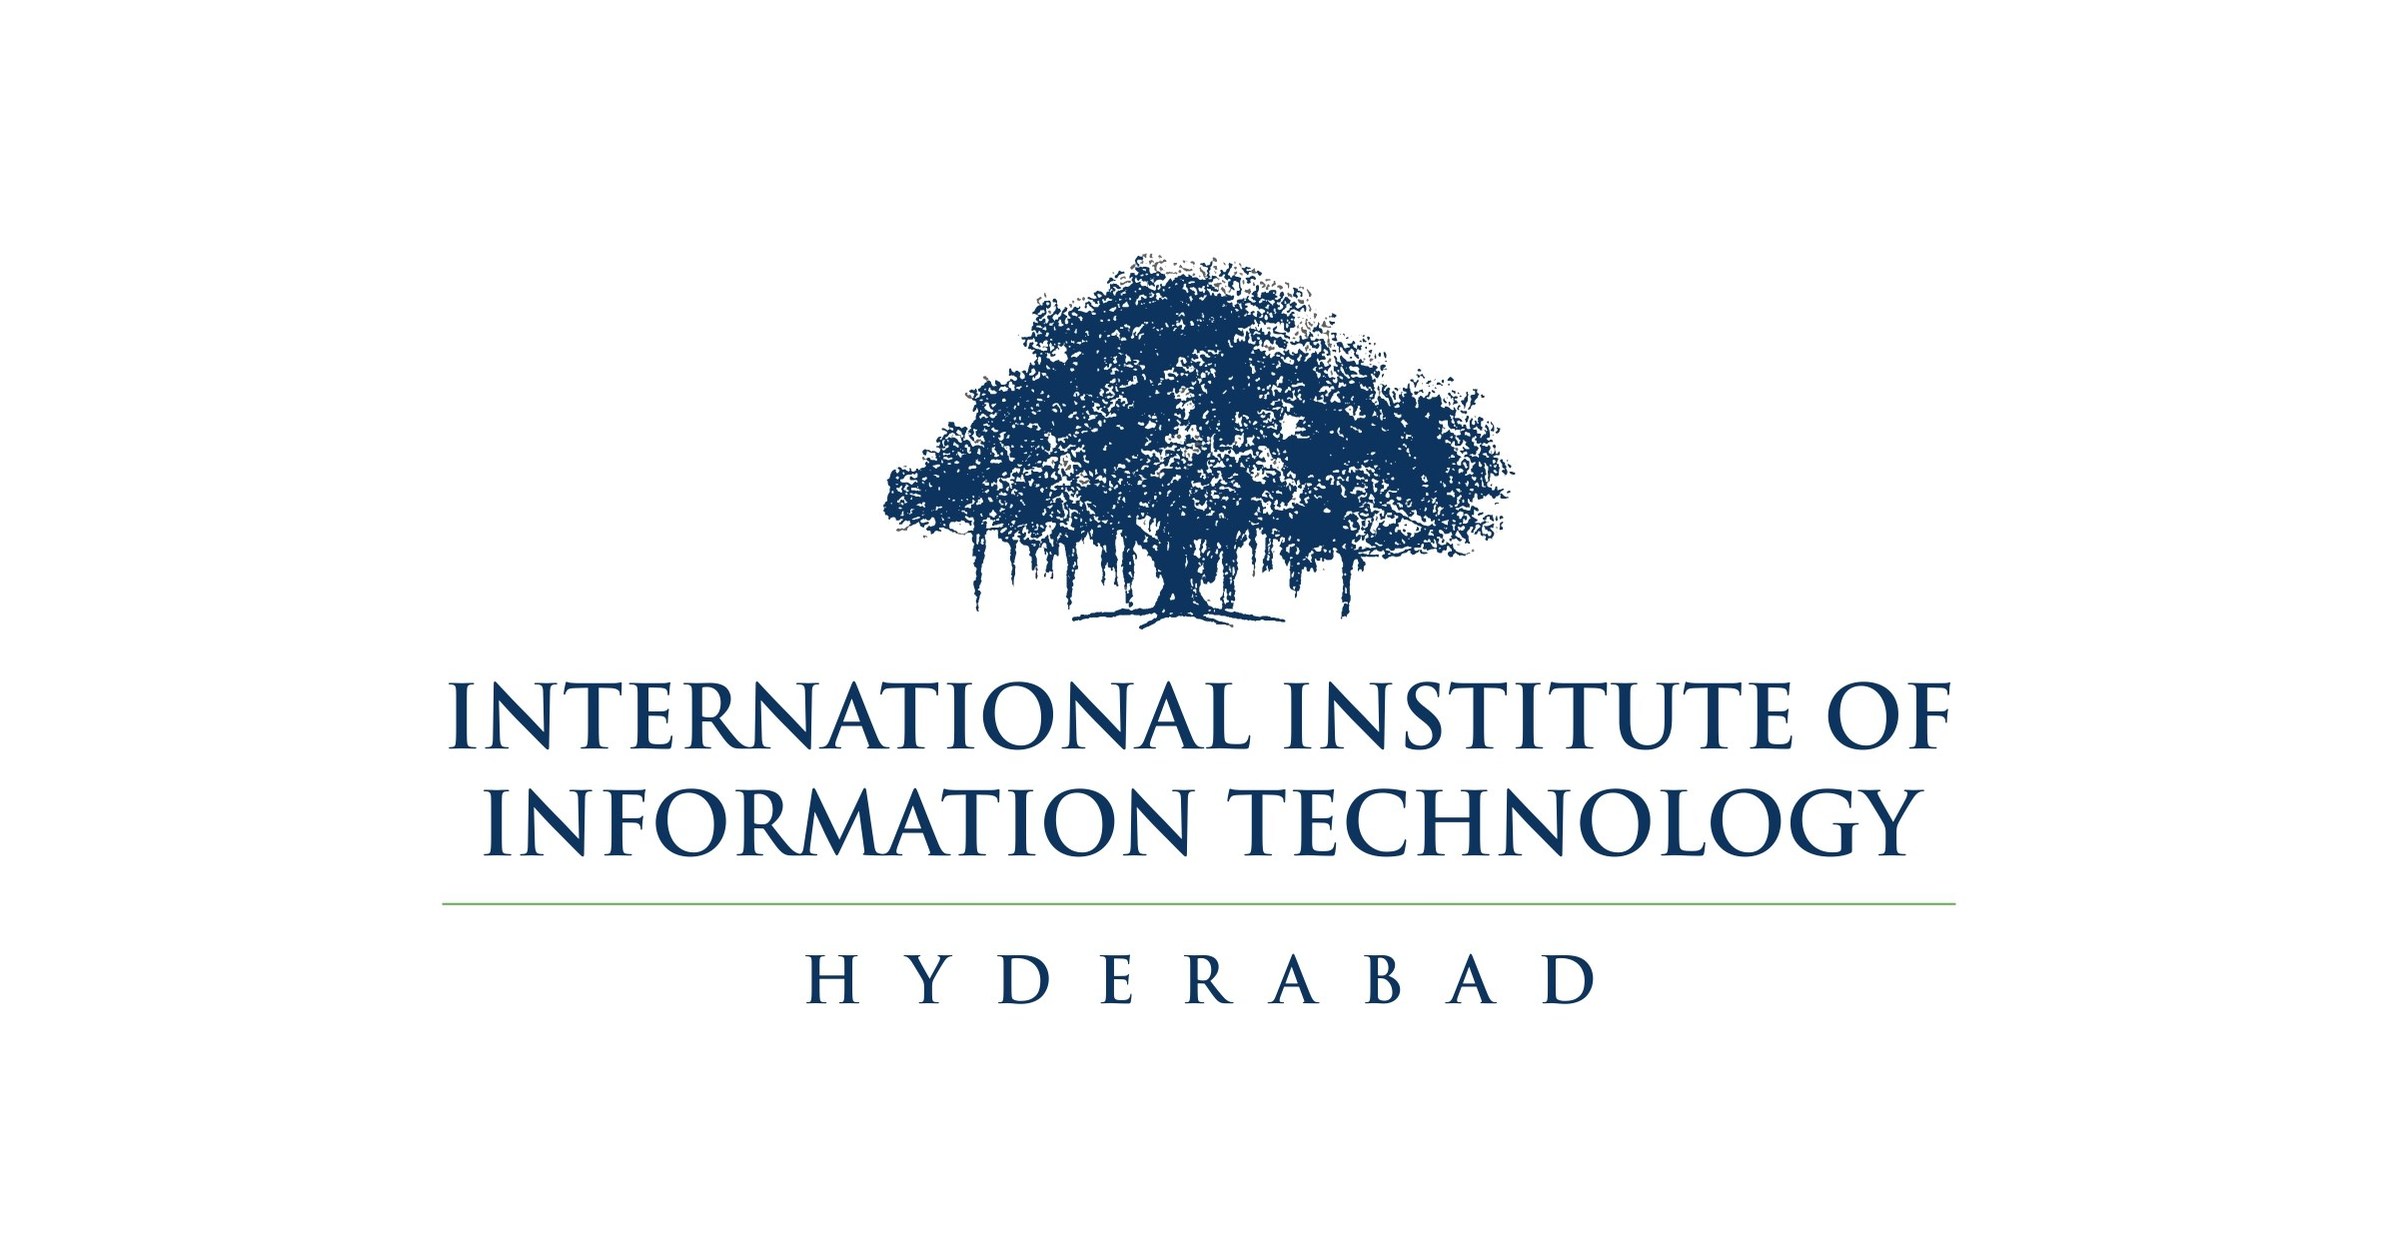 iHub-Data AT IIIT HYDERABAD LAUNCHES FOUNDATIONS OF MODERN MACHINE LEARNING COURSE